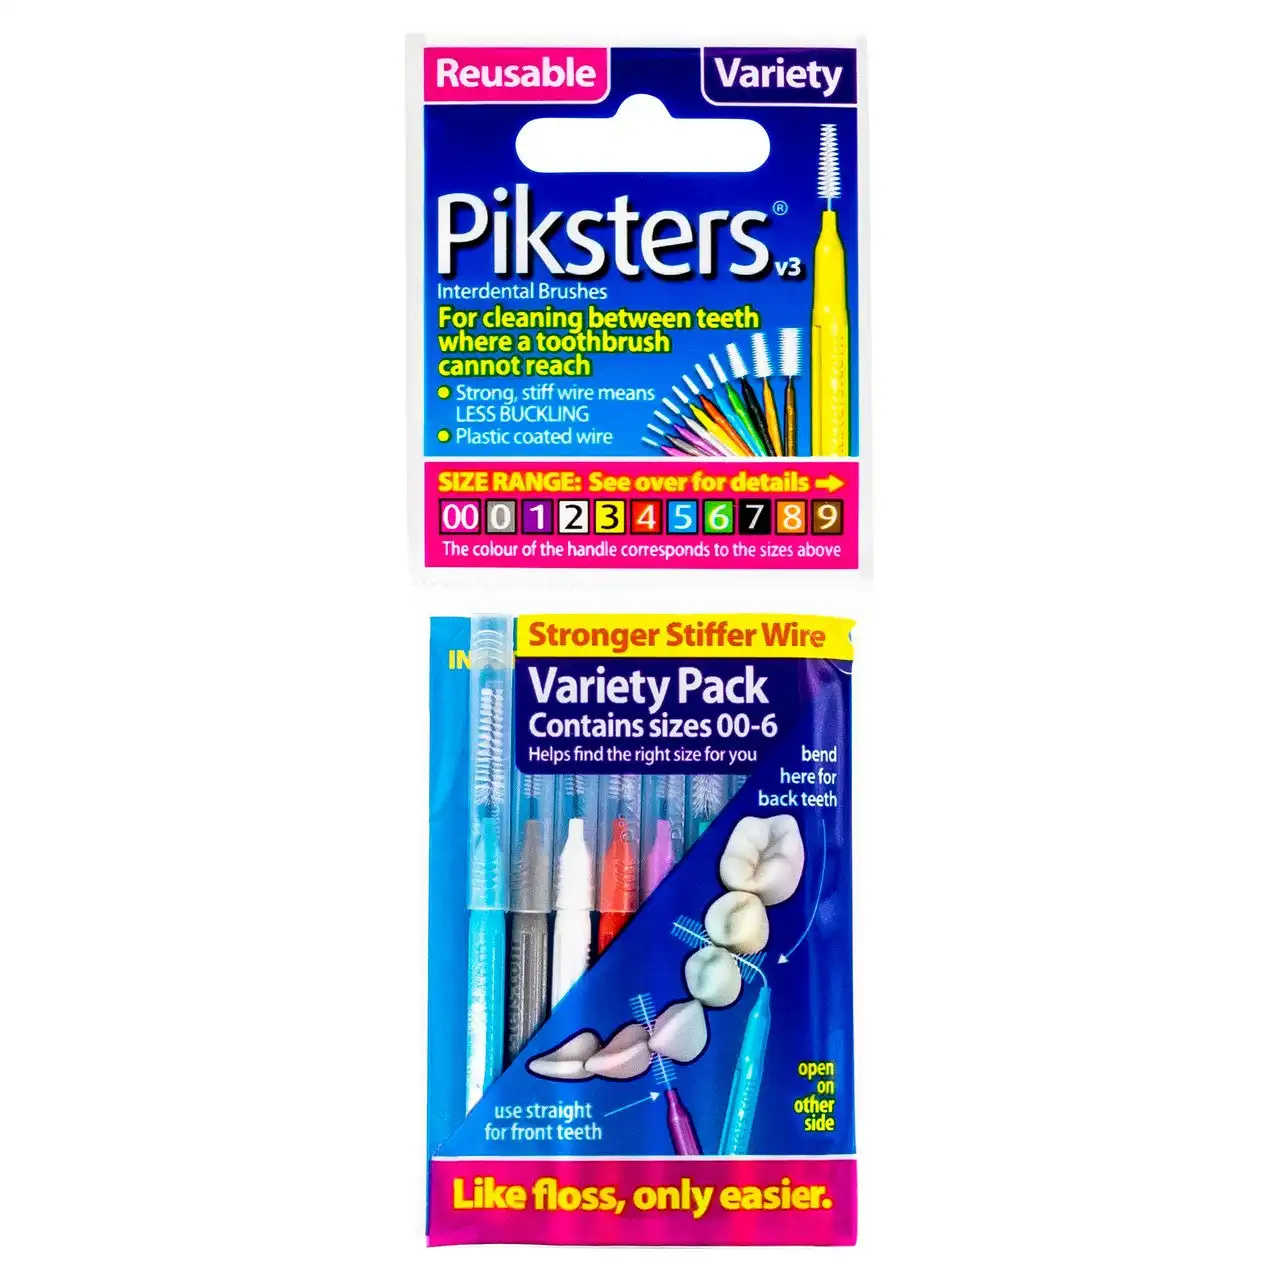 Piksters(R) Interdental Brushes Variety 8pk